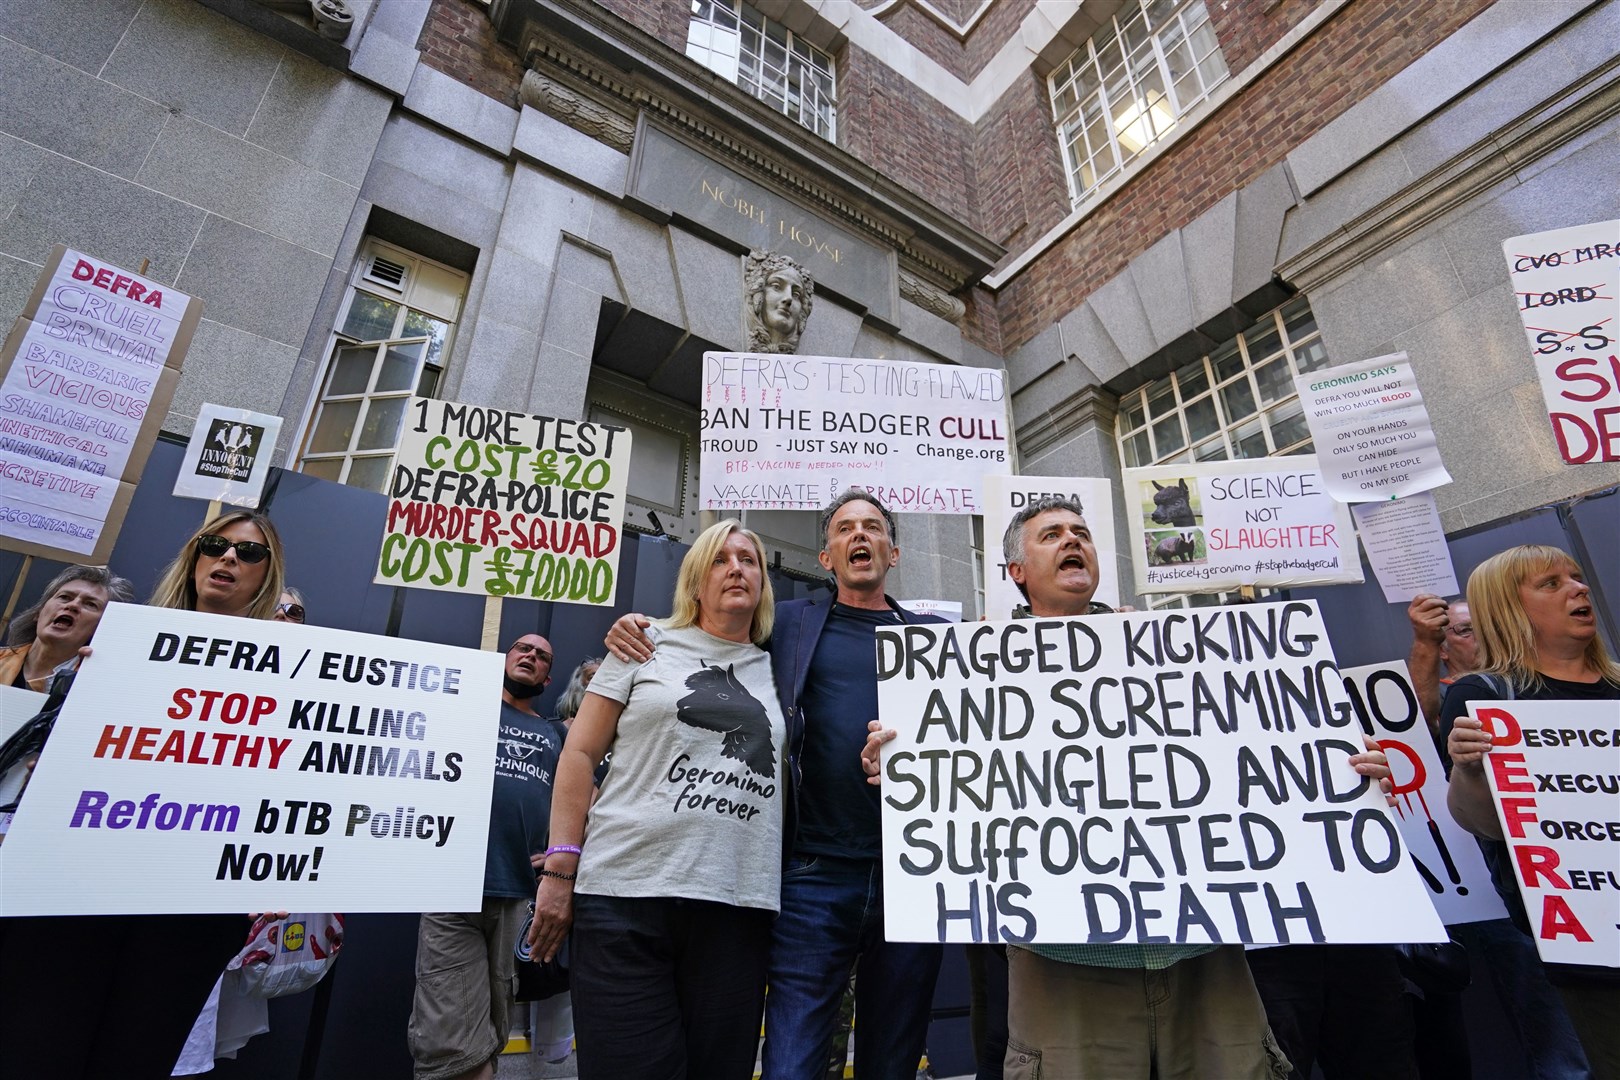 Helen Macdonald led a protest outside Defra HQ in London (Dominic Lipinski/PA)